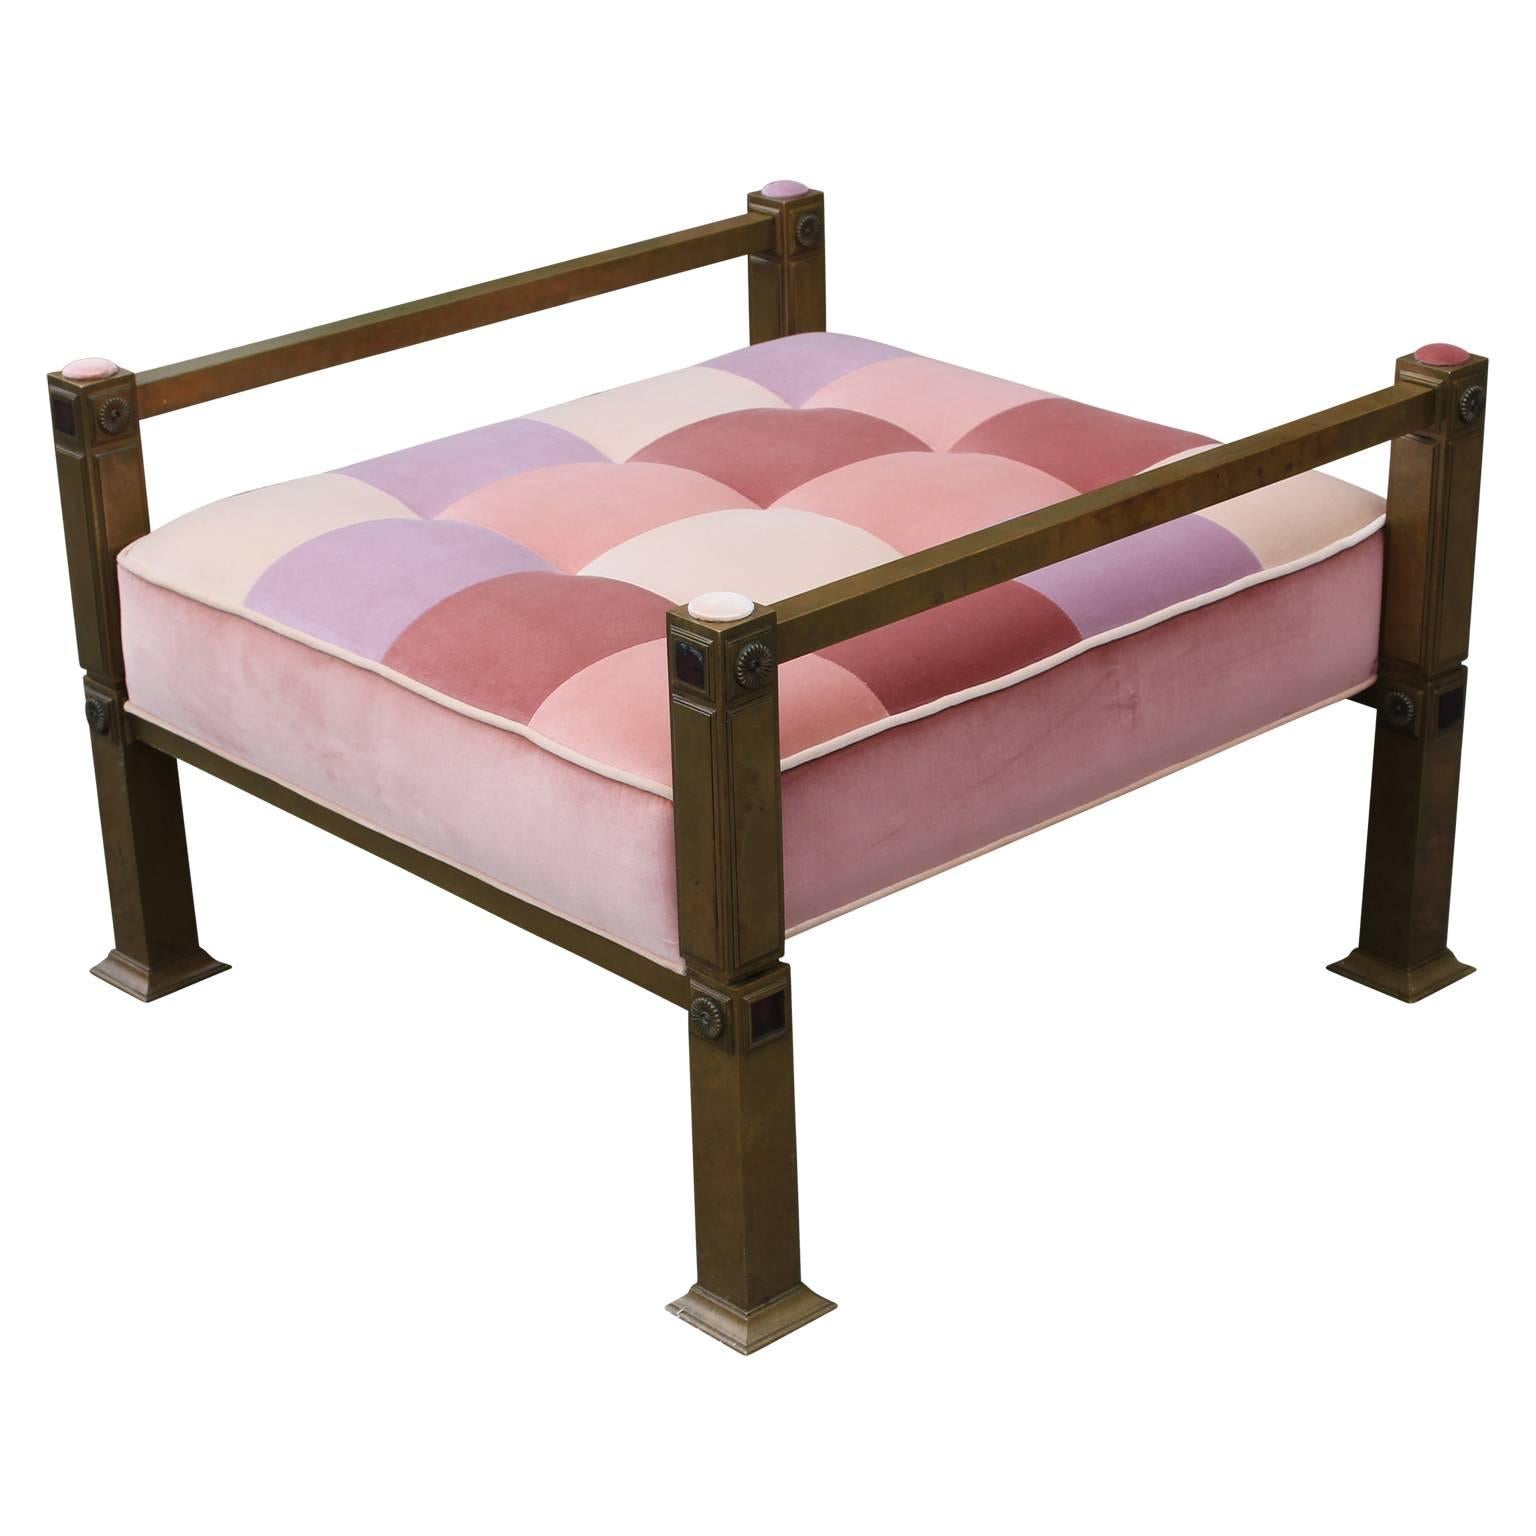 Gorgeous Mastercraft style Hollywood Regency brass bench upholstered in a fun patchwork pattern of an assortment of pink velvets. Unique and eye-catching.